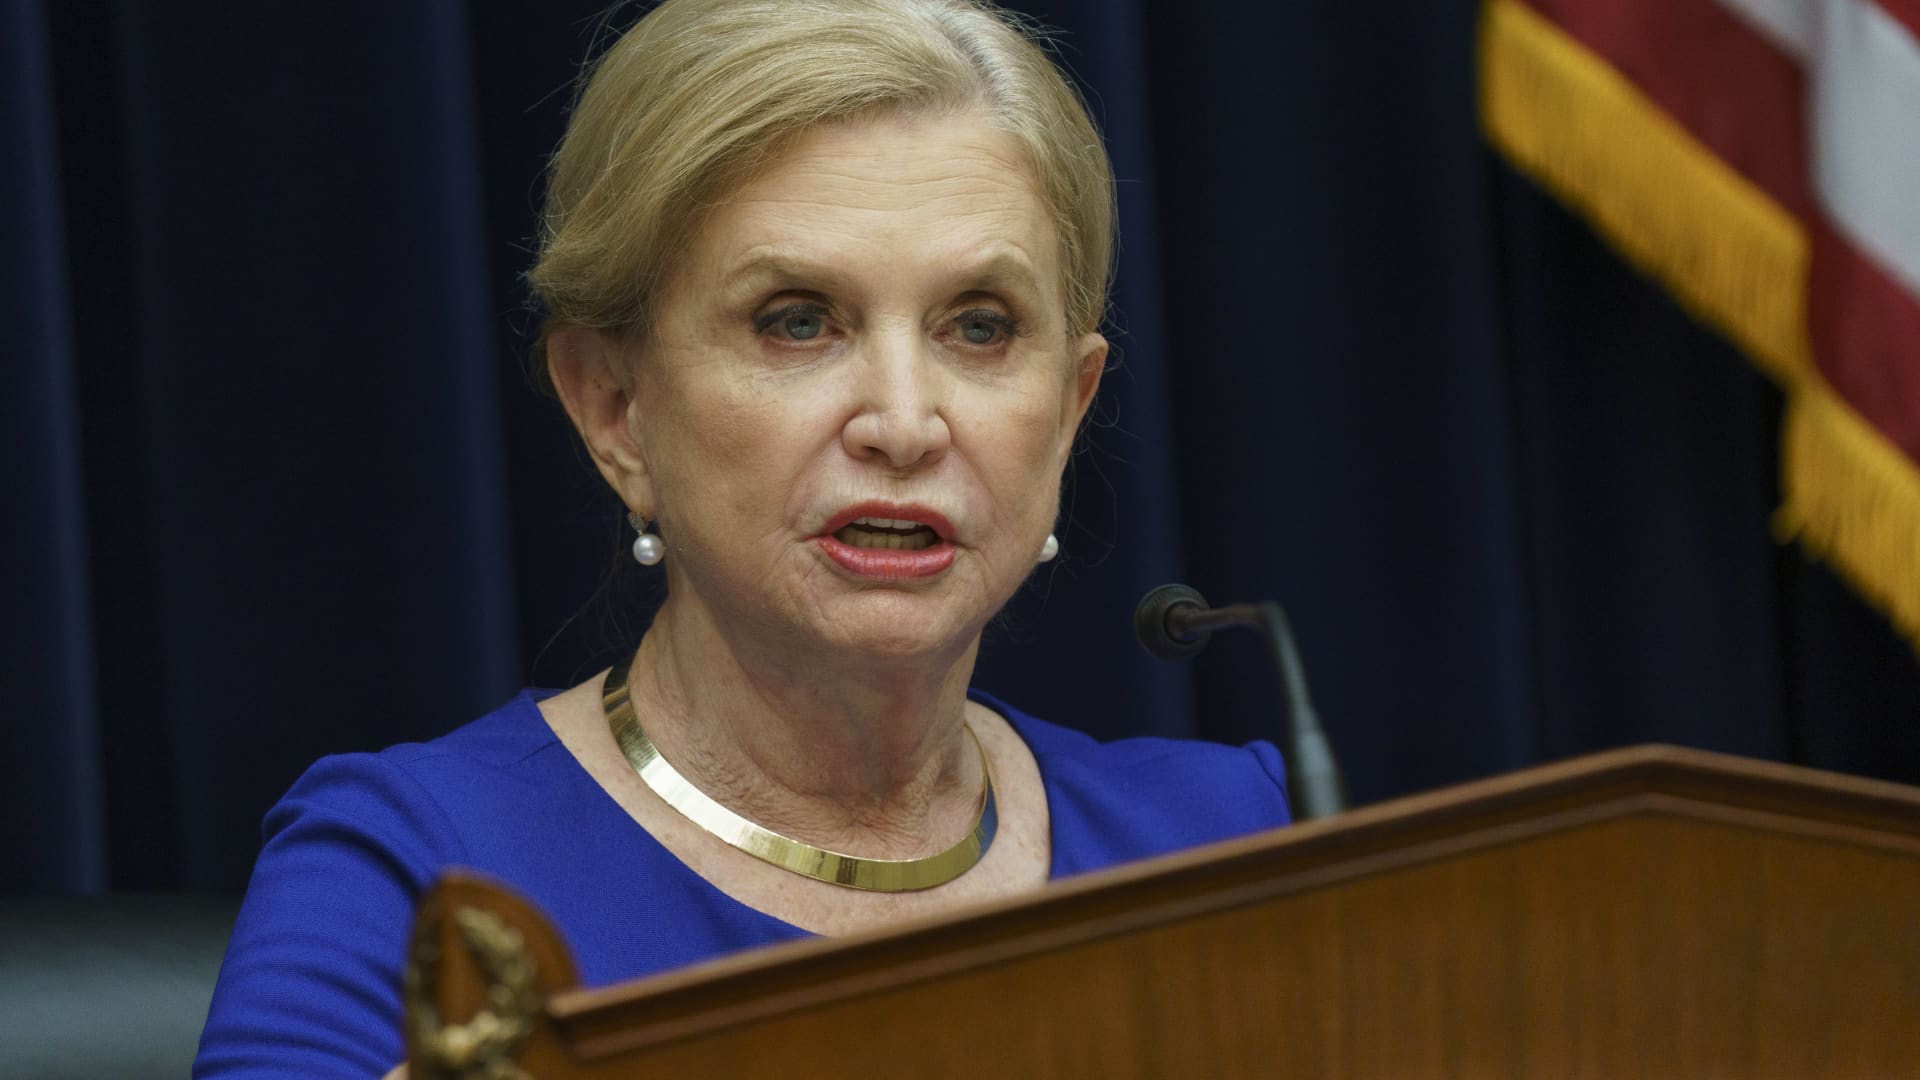 Representative Carolyn Maloney, a Democrat from New York and chair of the House Committee on Oversight and Reform, speaks during a hearing in Washington, D.C., U.S., on Oct. 28, 2021.